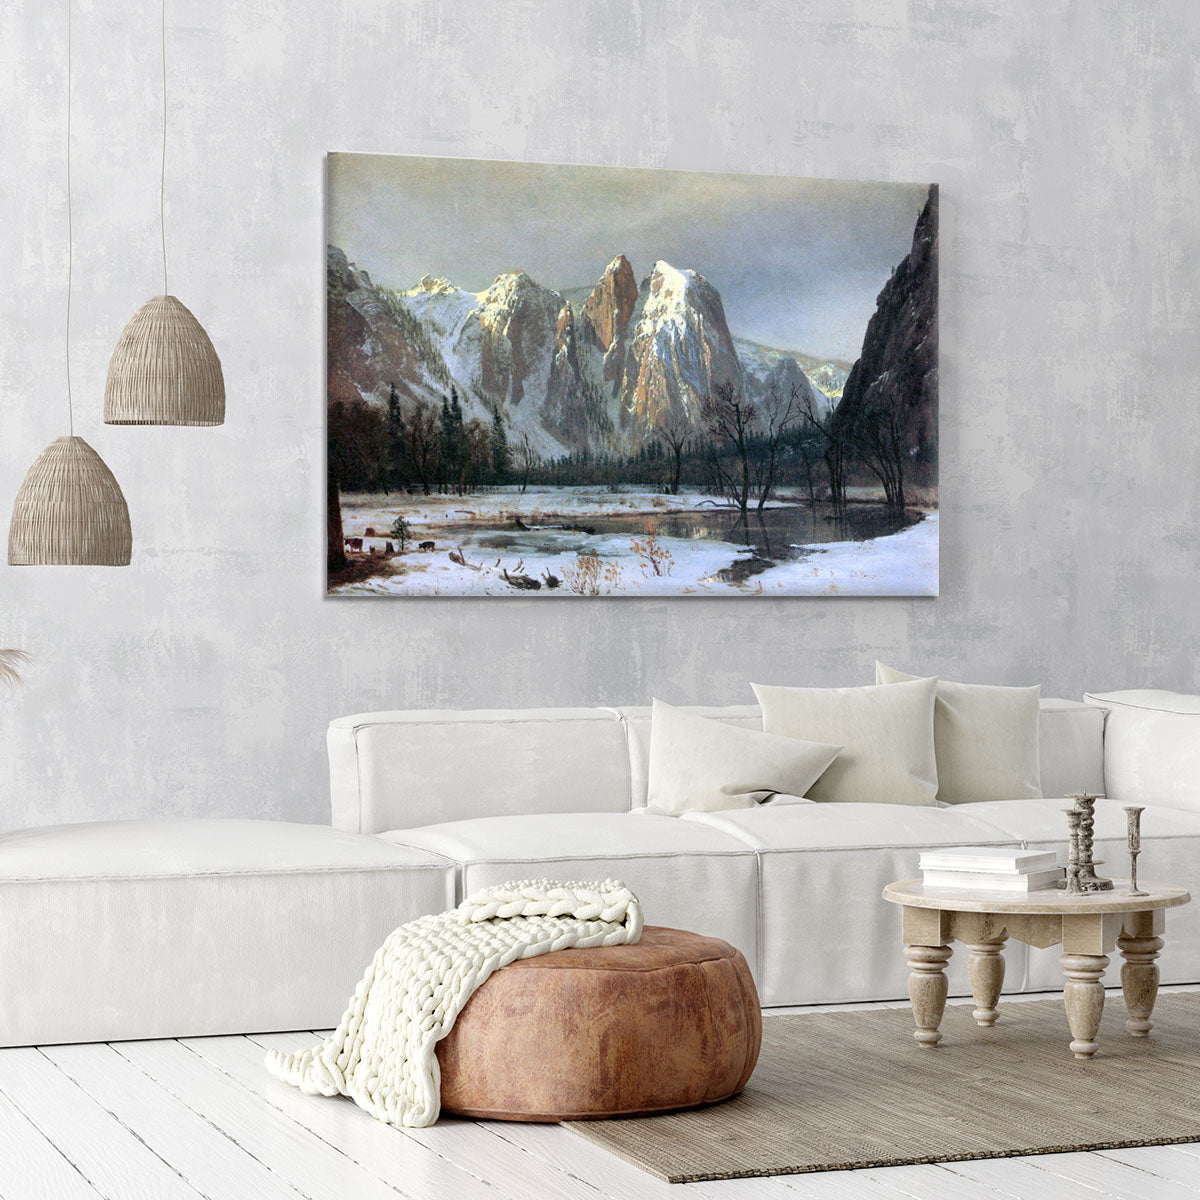 Cathedral Rocks Yosemite by Bierstadt Canvas Print or Poster - Canvas Art Rocks - 6